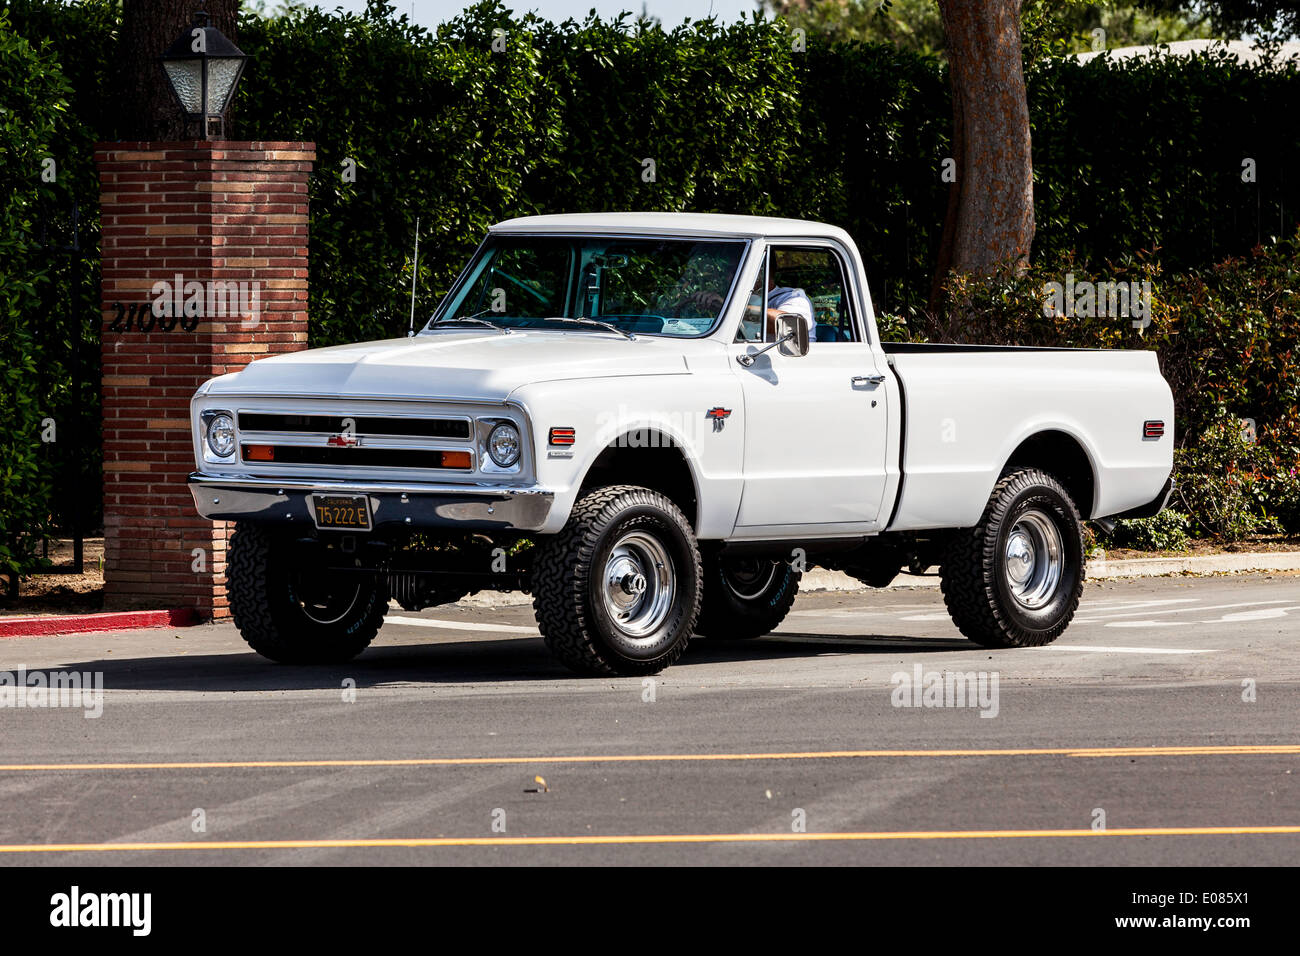 A 1968 Chevy K10 Truck in 4 wheel drive Stock Photo